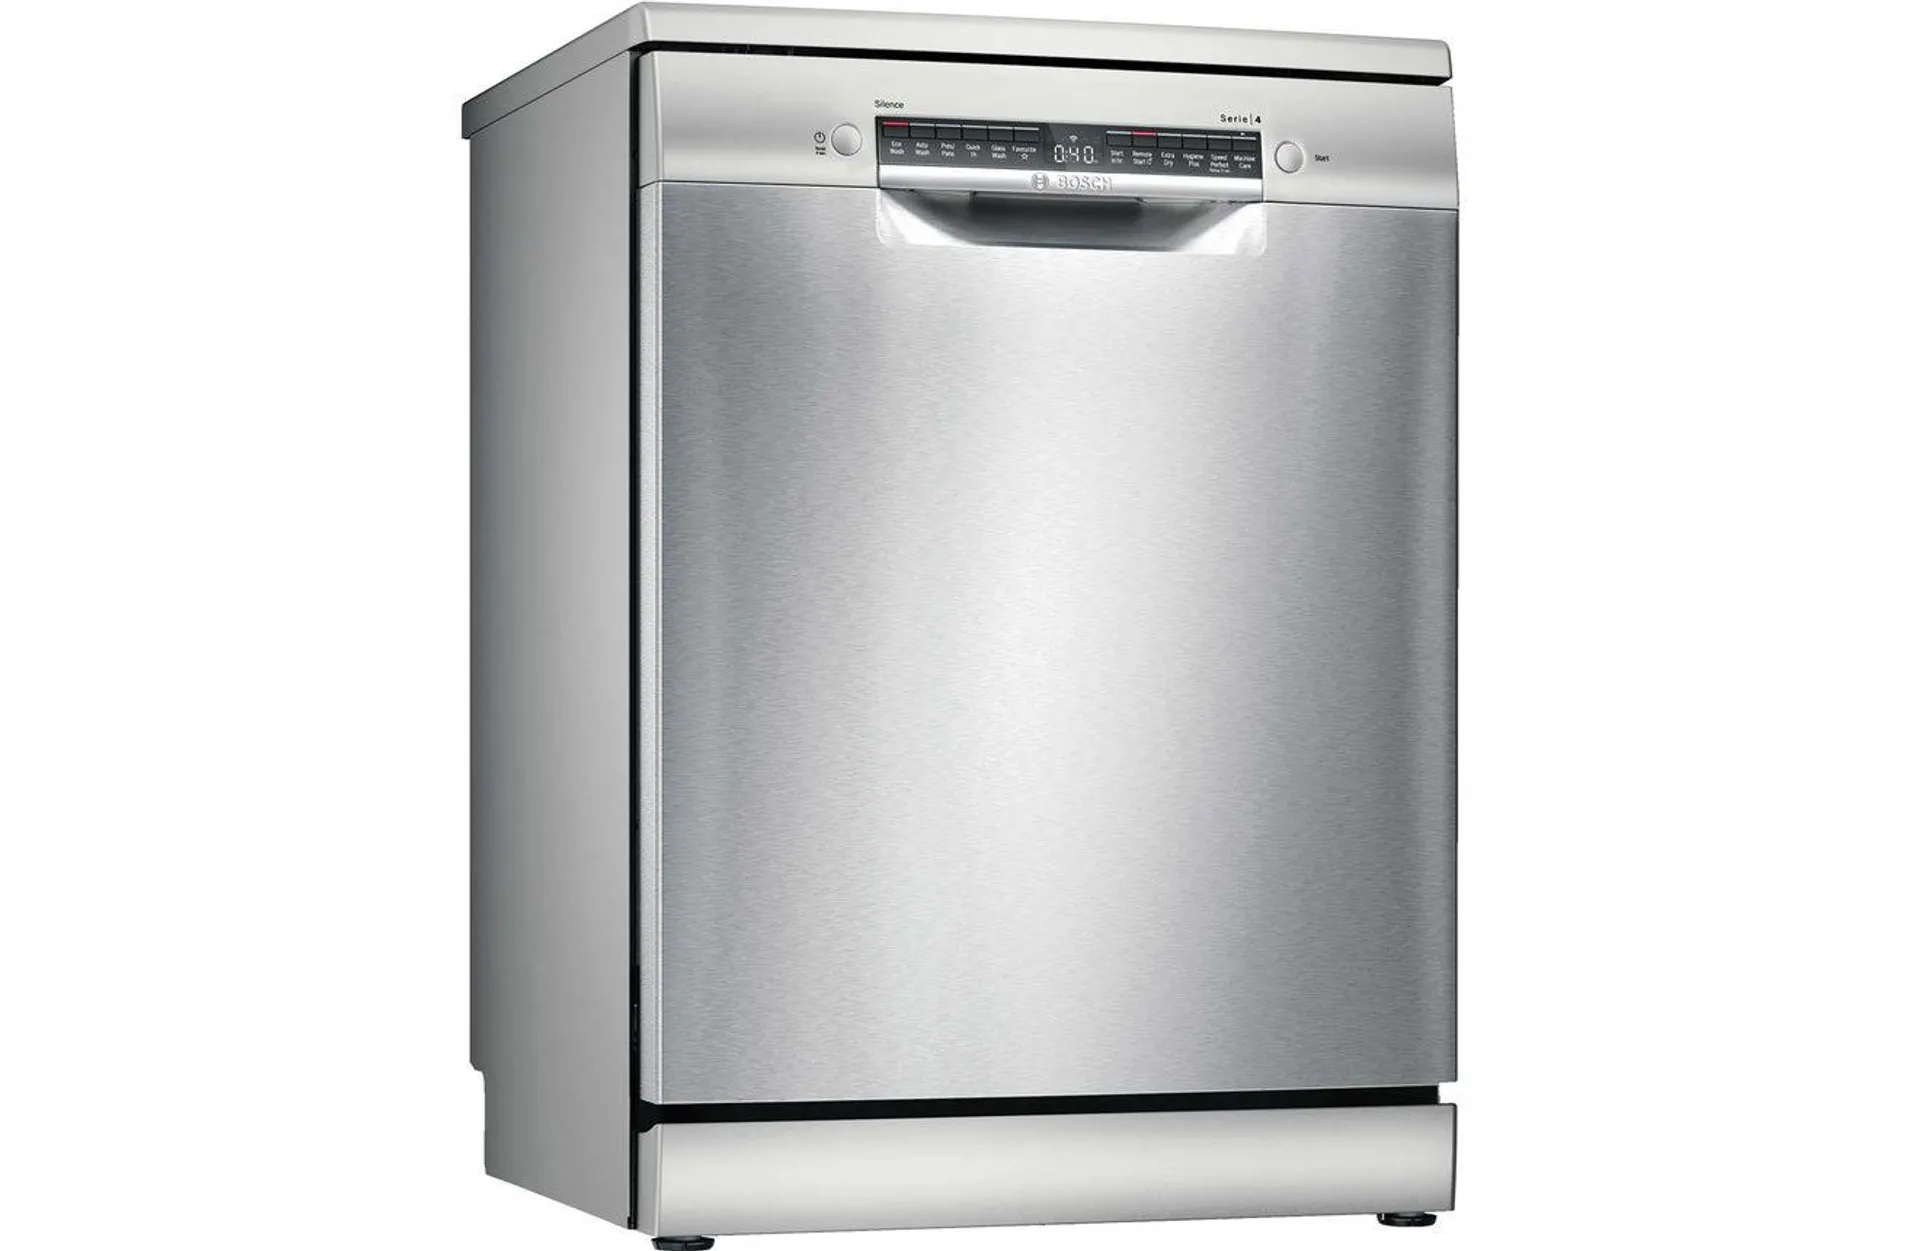 Bosch Series 4 | 14 Place Setting Freestanding Dishwasher - SMS4HVI01A